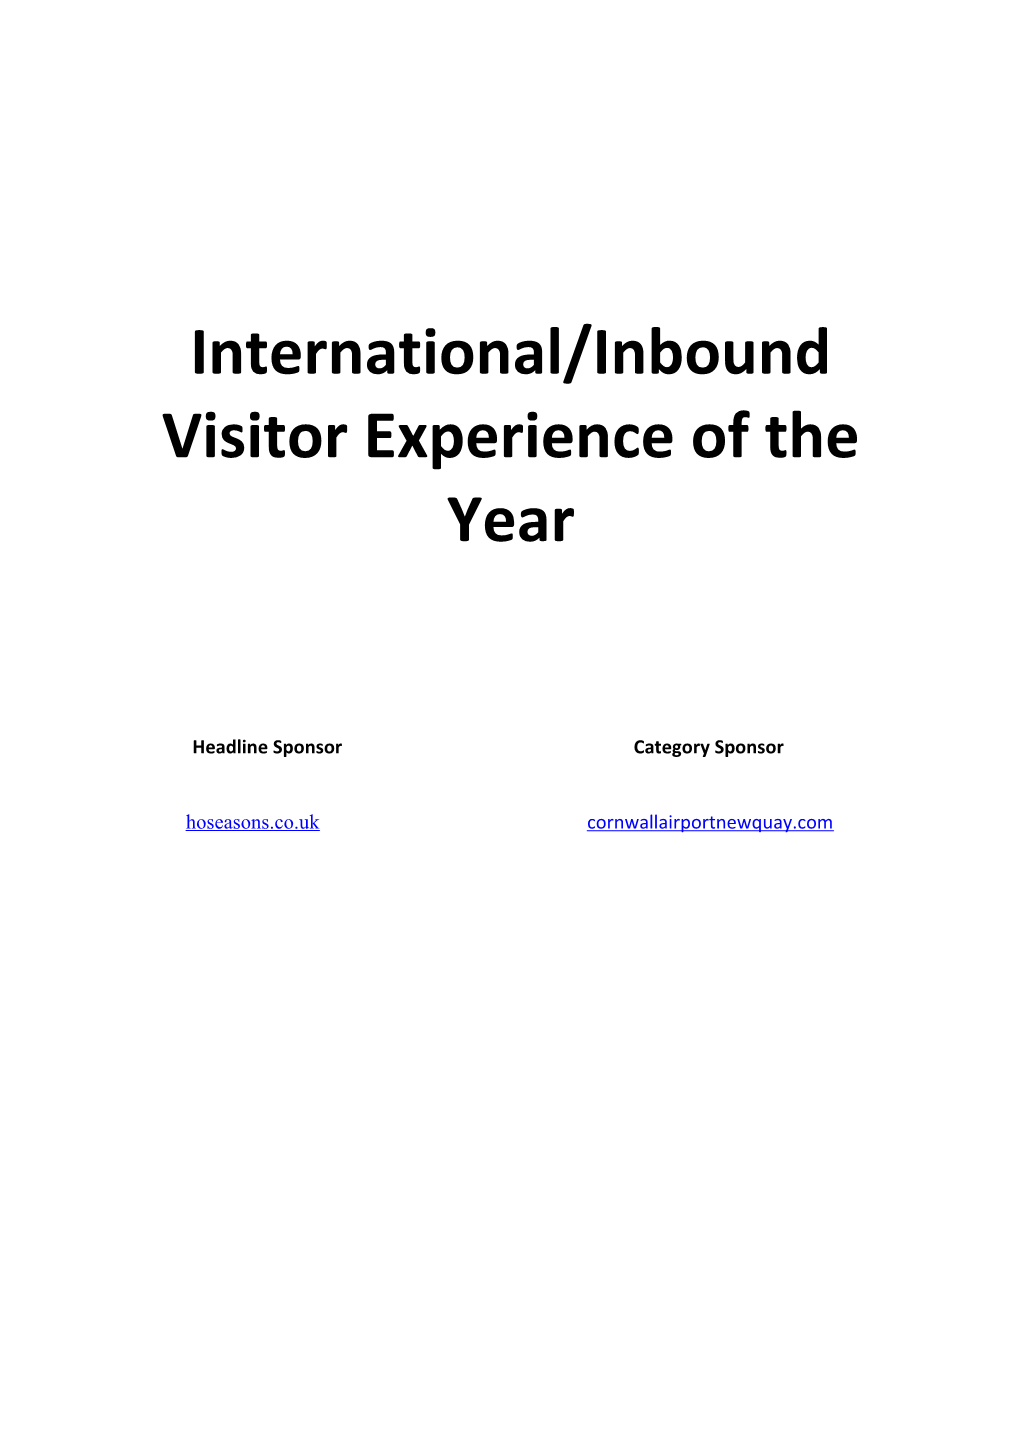 International/Inbound Visitor Experience of the Year